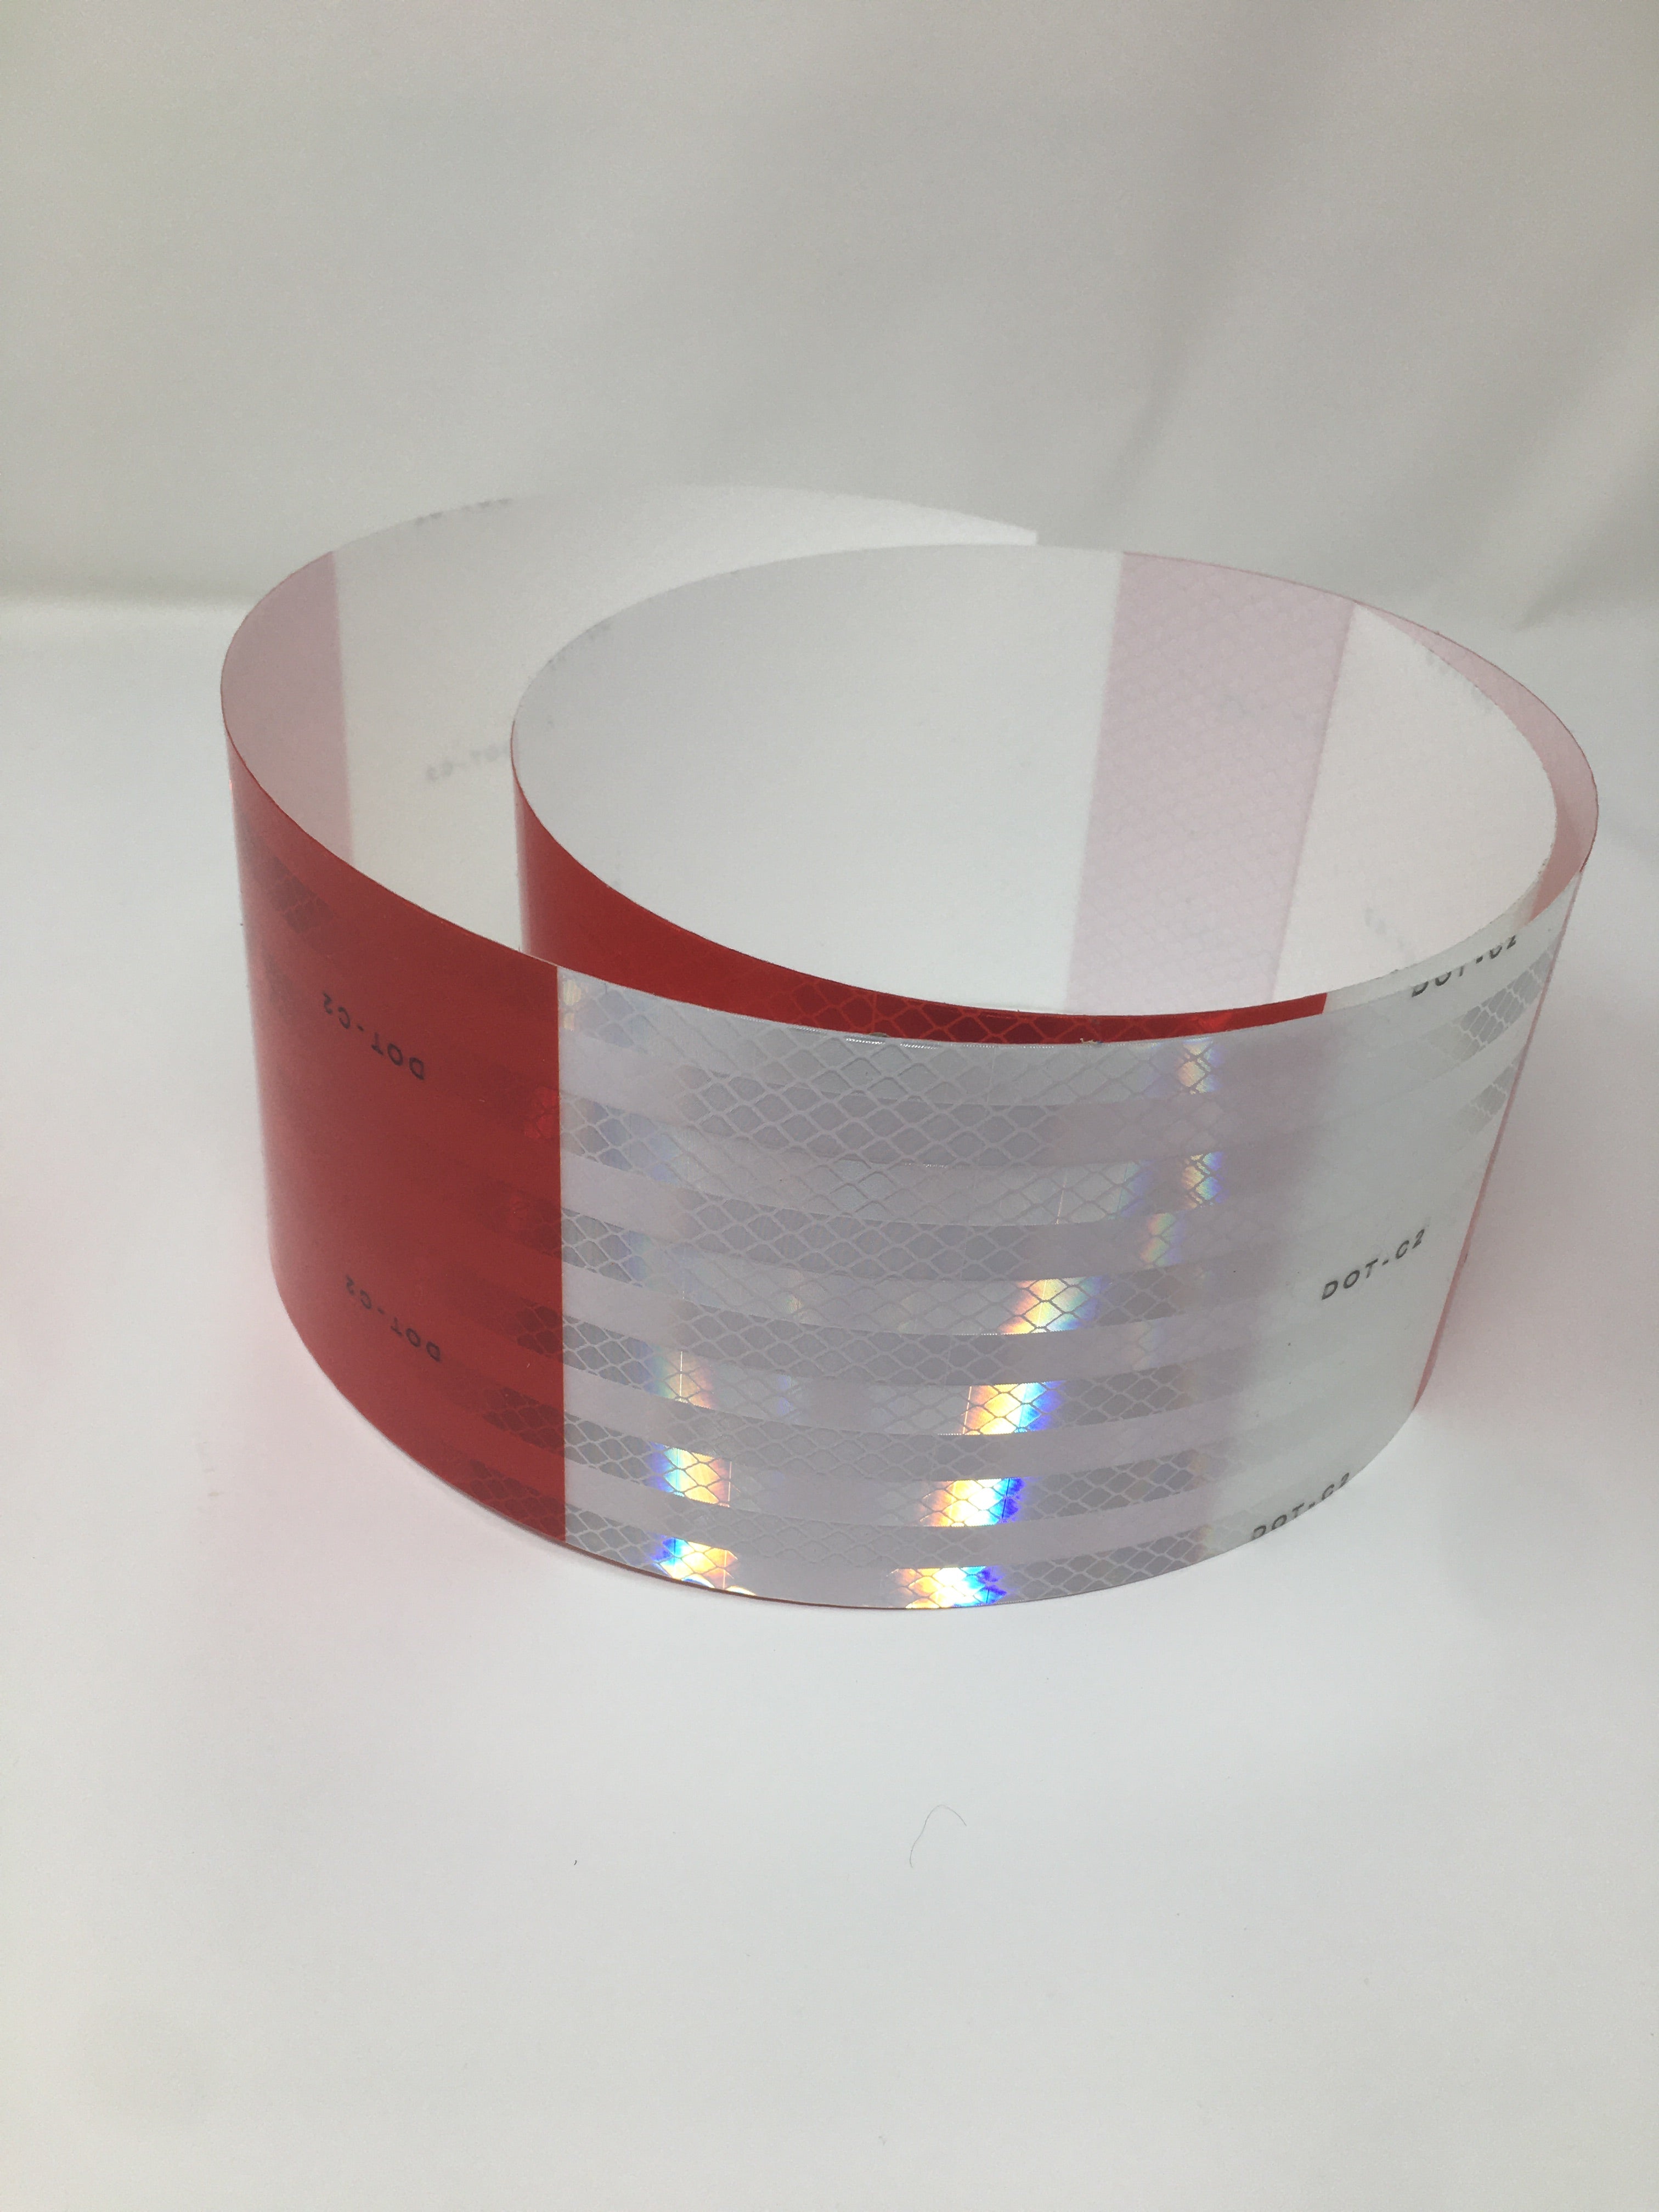 10 Foot Roll of 3M 983 Series DOT Reflective Conspicuity Tape 4 Inch Wide - Converted from Master Roll - See Image #3